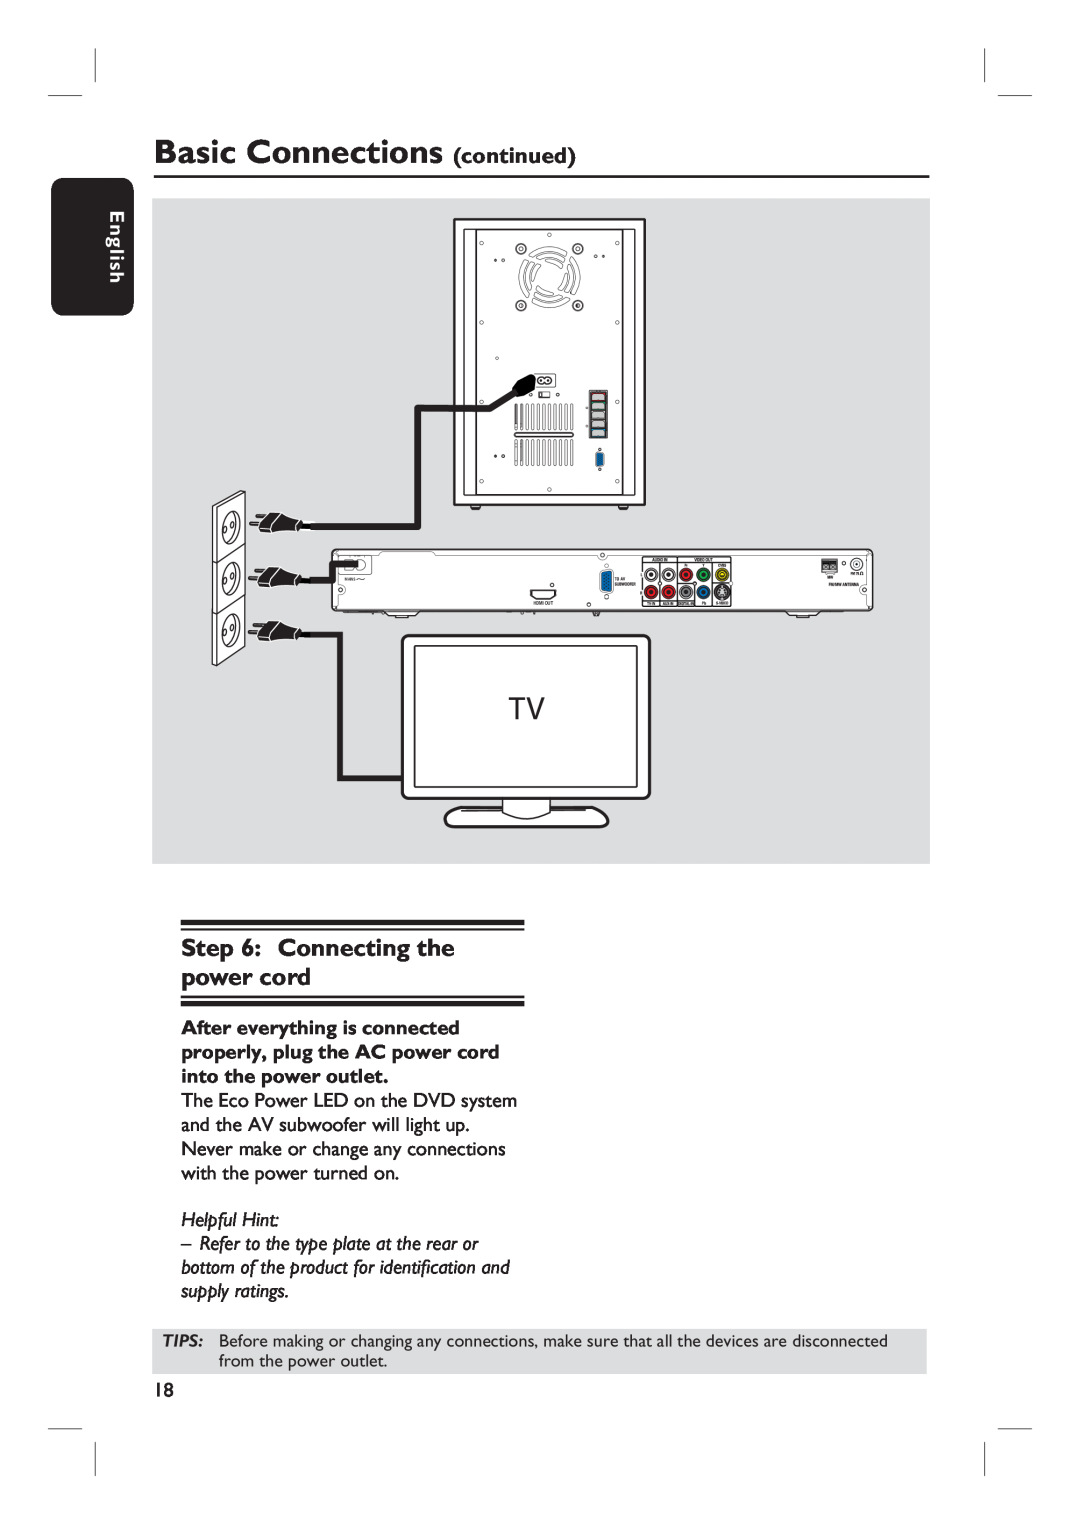 Philips HTS3455 user manual Connecting the power cord, Helpful Hint, Basic Connections continued, English 